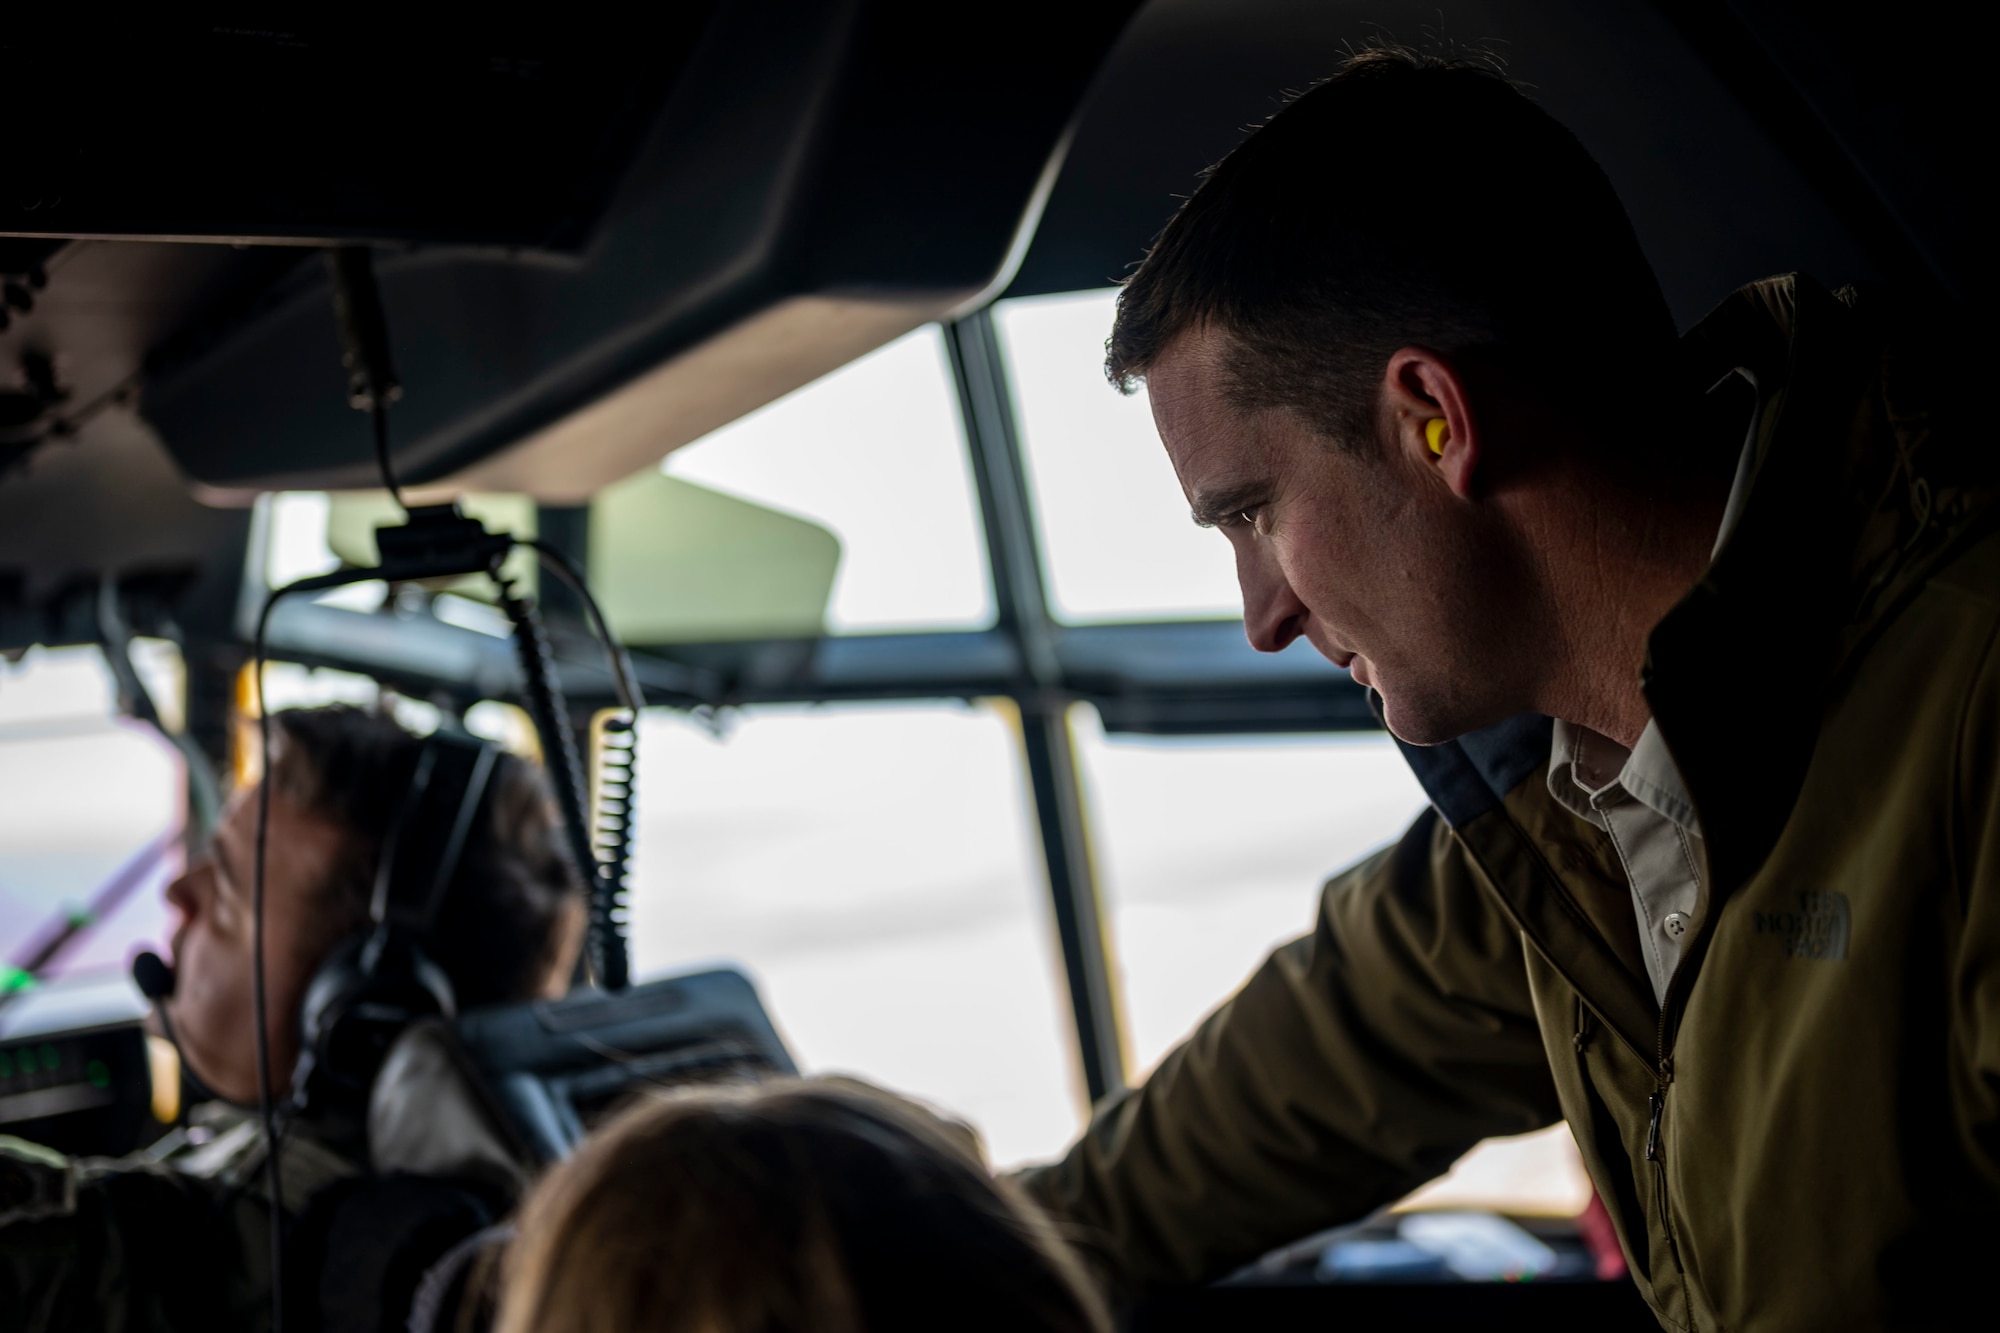 An honorary commander inductee looks out the cockpit of a C-130J Super Hercules during an honorary commander induction tour incentive flight at Dyess Air Force Base, Texas, Jan. 20, 2023. The Honorary Commander Program is an executive-level program intended to educate community members who have limited knowledge of the Air Force and Dyess to foster public support for the base and its Airmen and families. (U.S. Air Force photo by Senior Airman Leon Redfern)